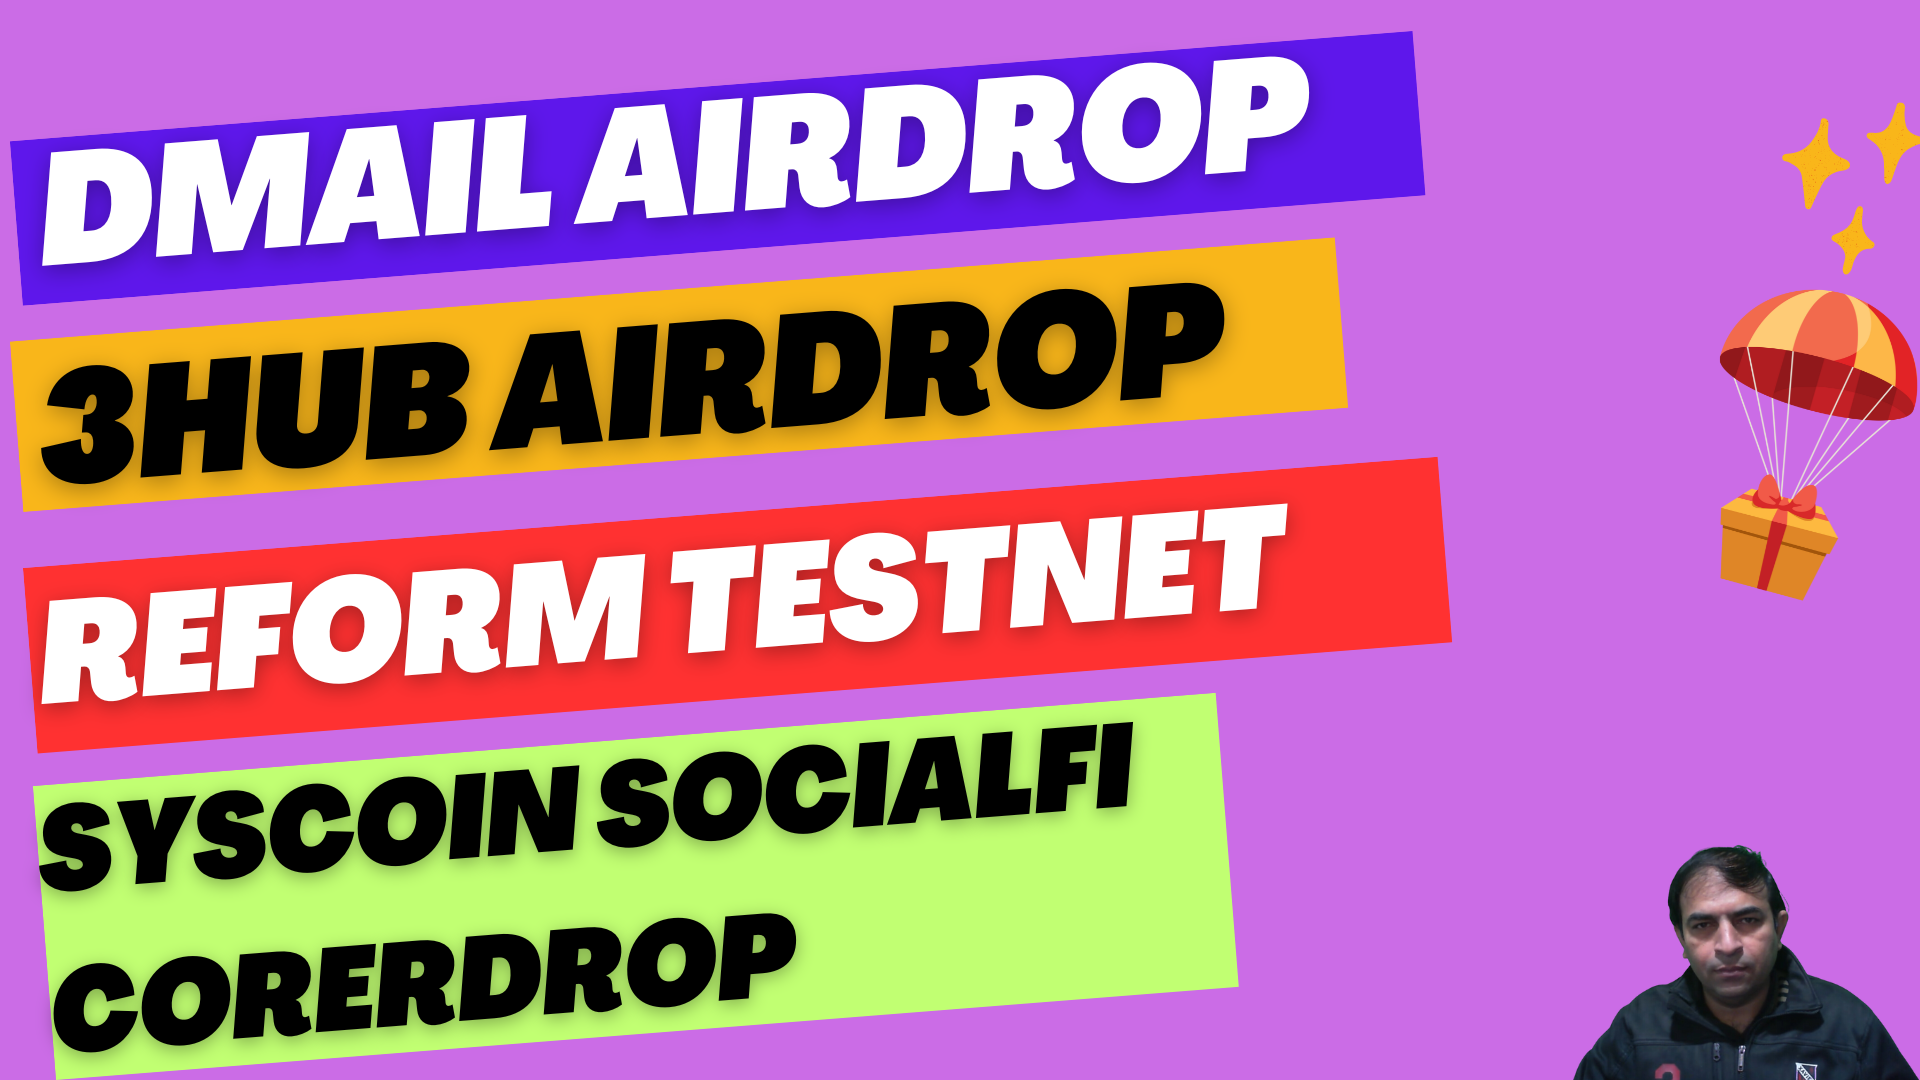 Dmail Airdrop